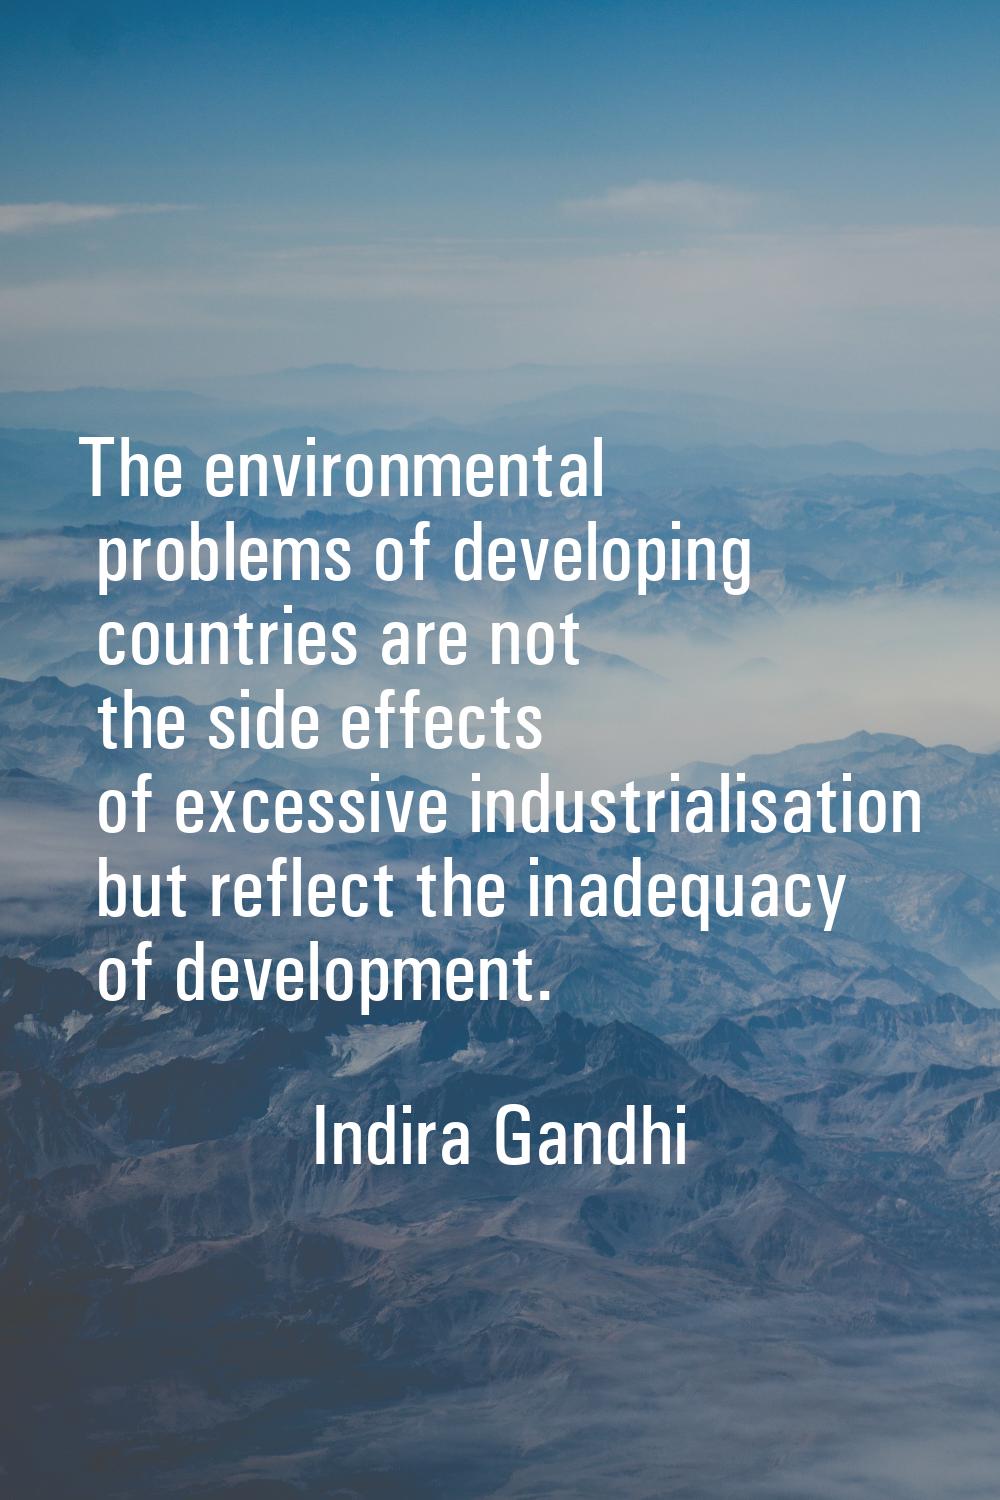 The environmental problems of developing countries are not the side effects of excessive industrial